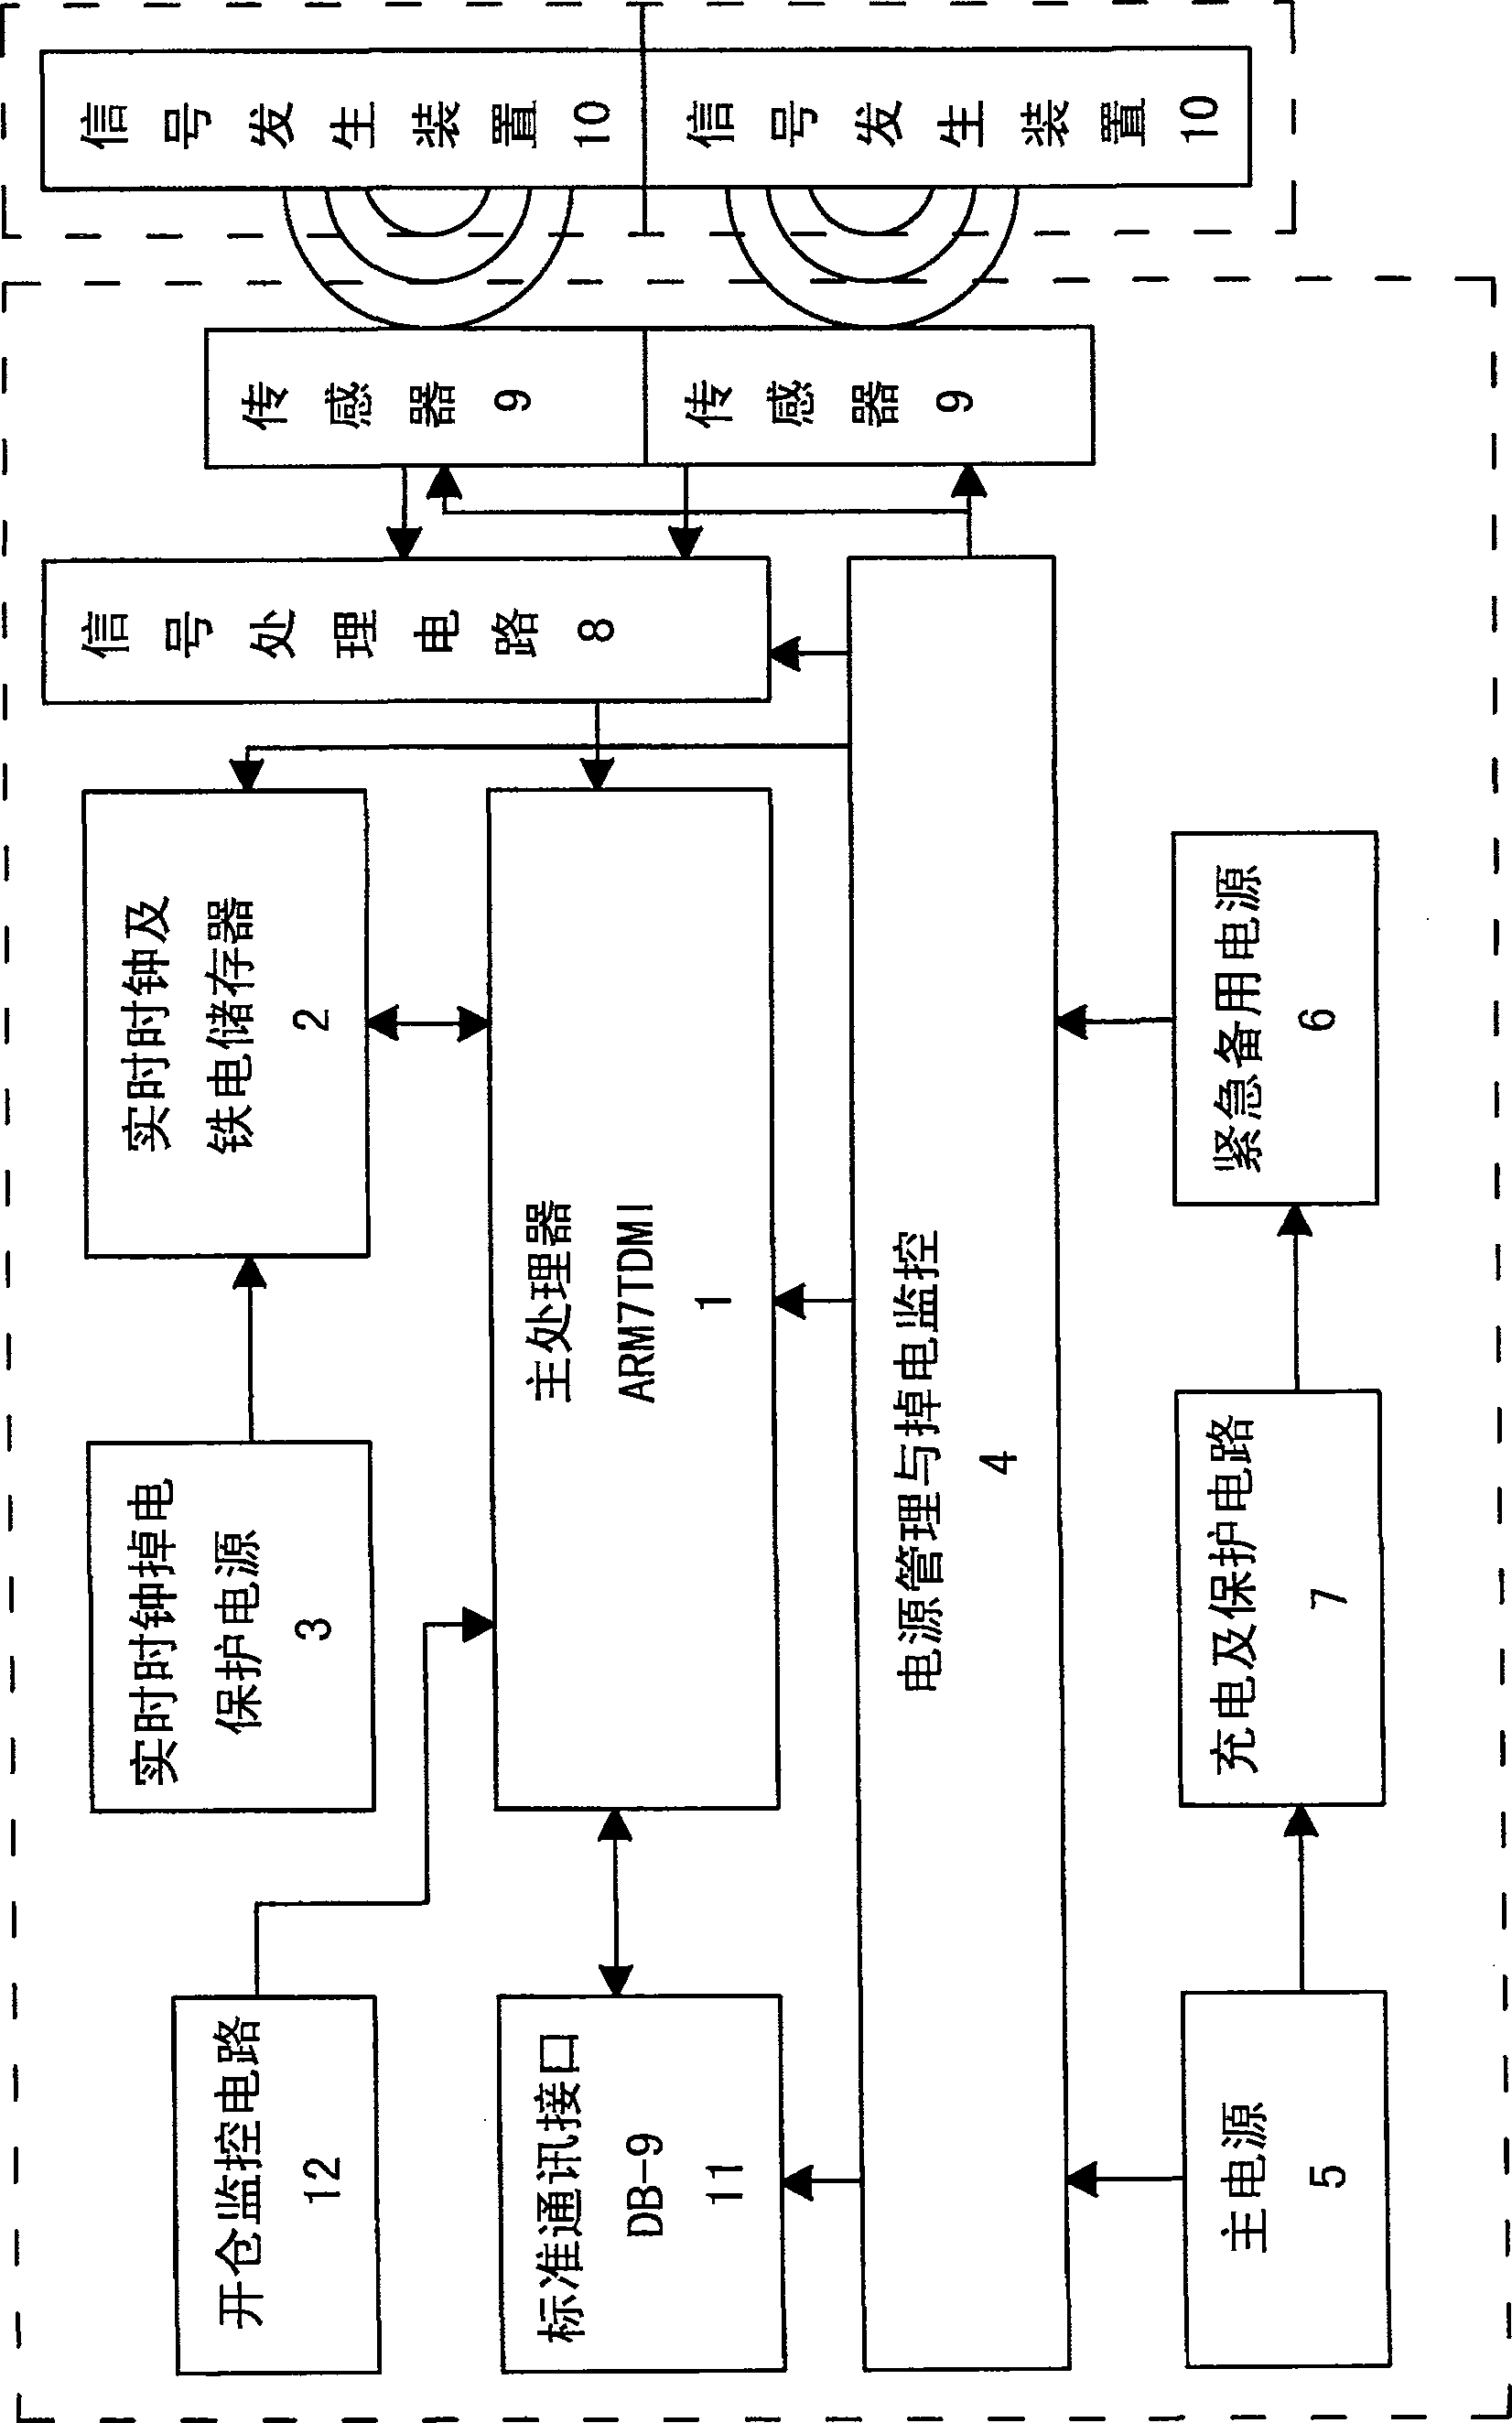 Cabinet security monitoring method and device in modern logistics